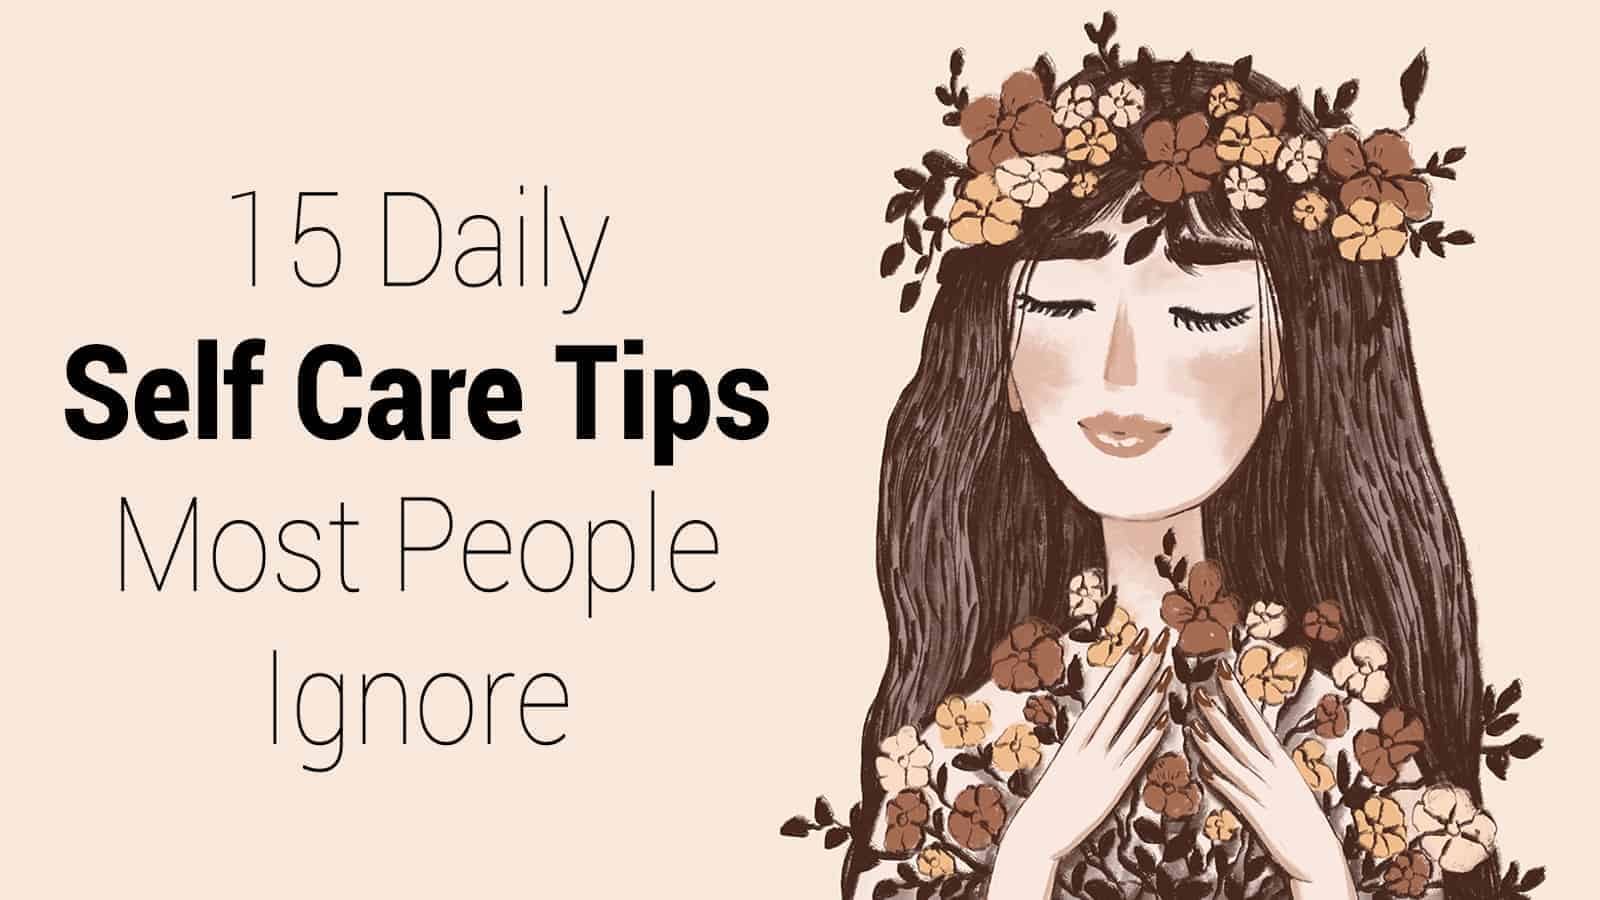 15 Daily Self Care Tips Most People Ignore